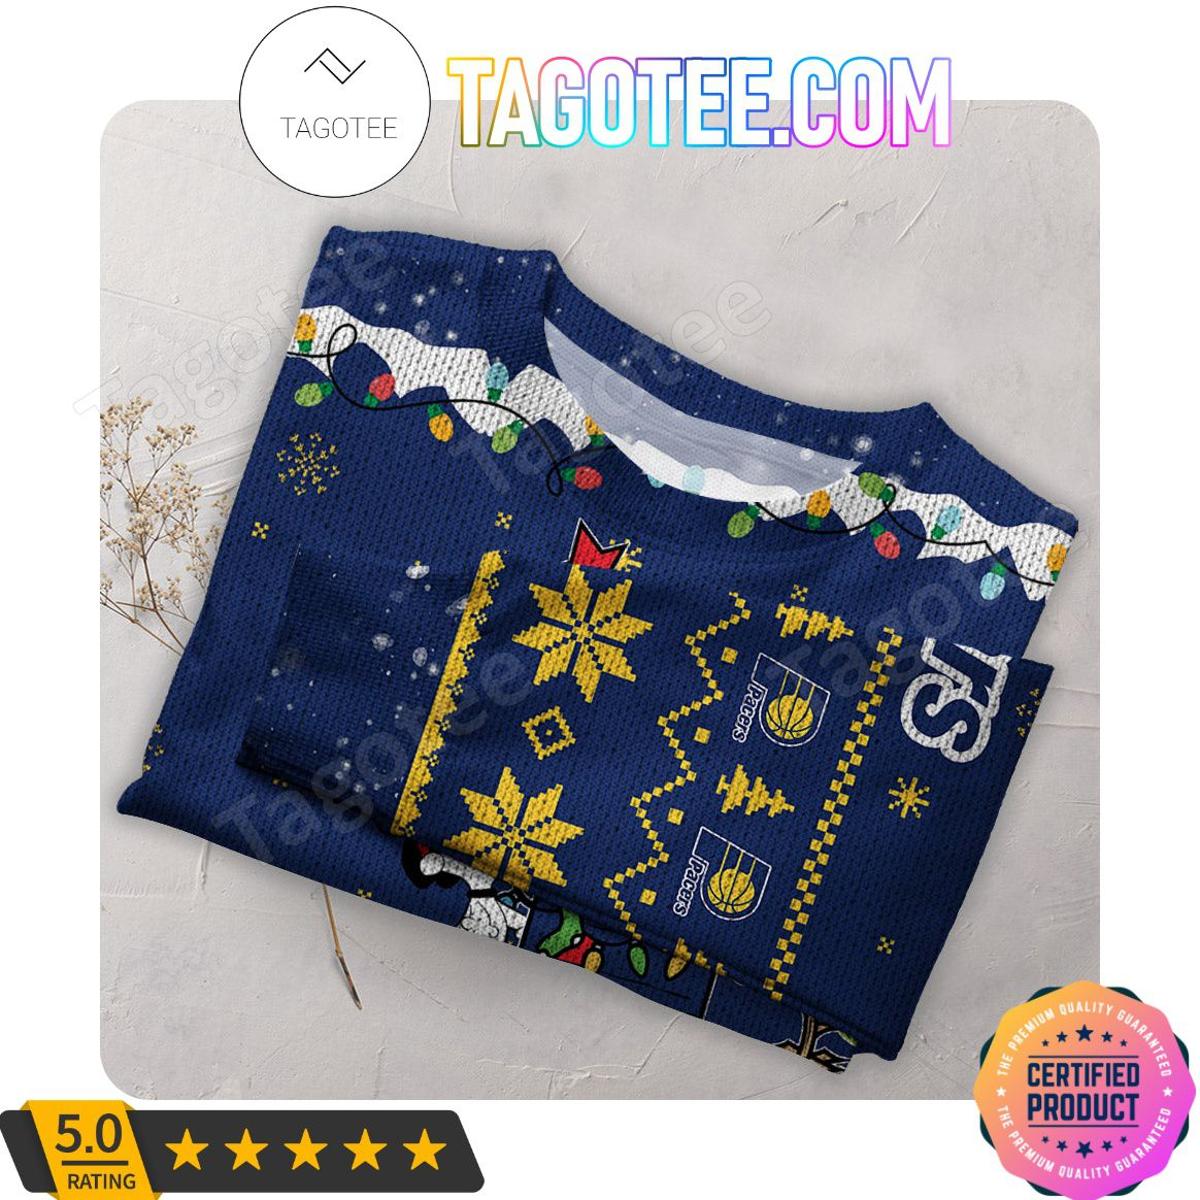 Indiana Pacers Snoopy Best Ugly Christmas Sweater